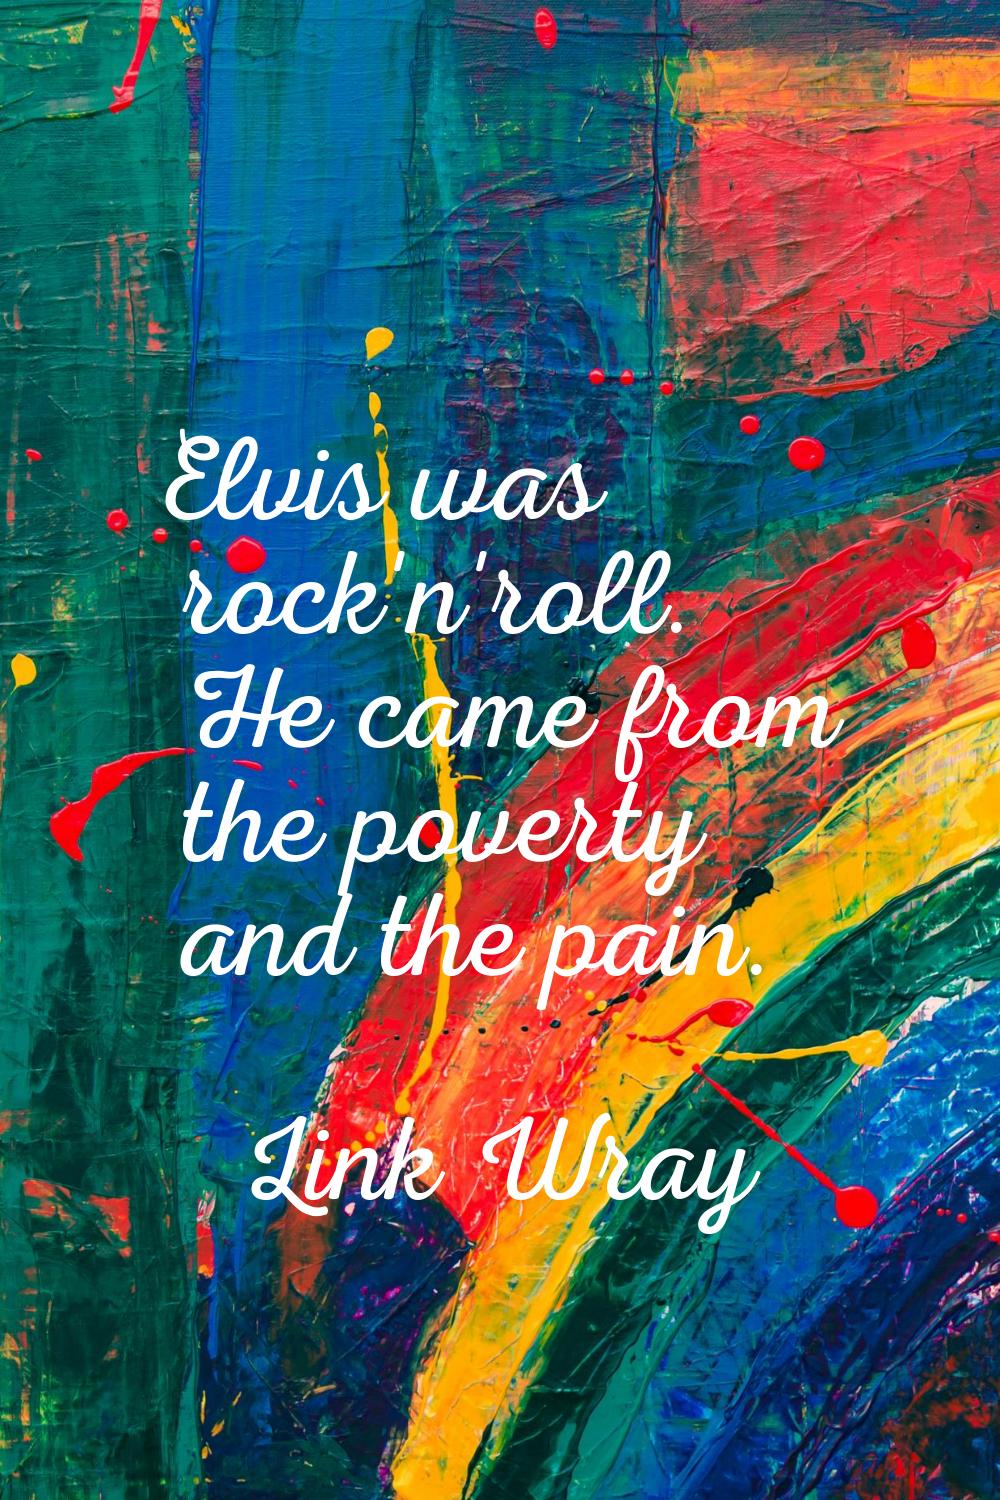 Elvis was rock'n'roll. He came from the poverty and the pain.